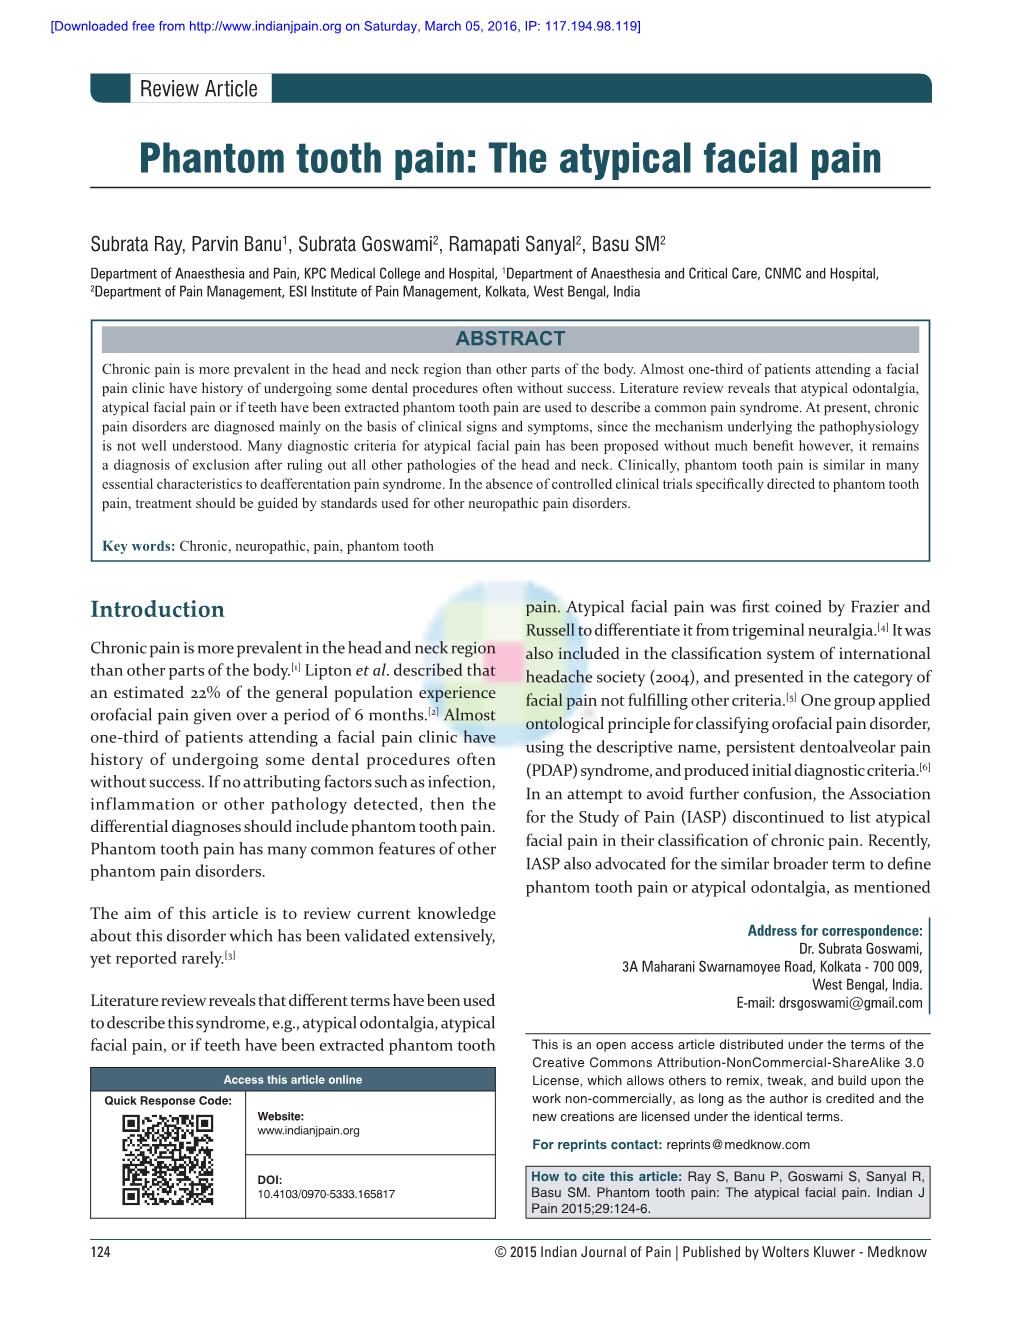 Phantom Tooth Pain: the Atypical Facial Pain